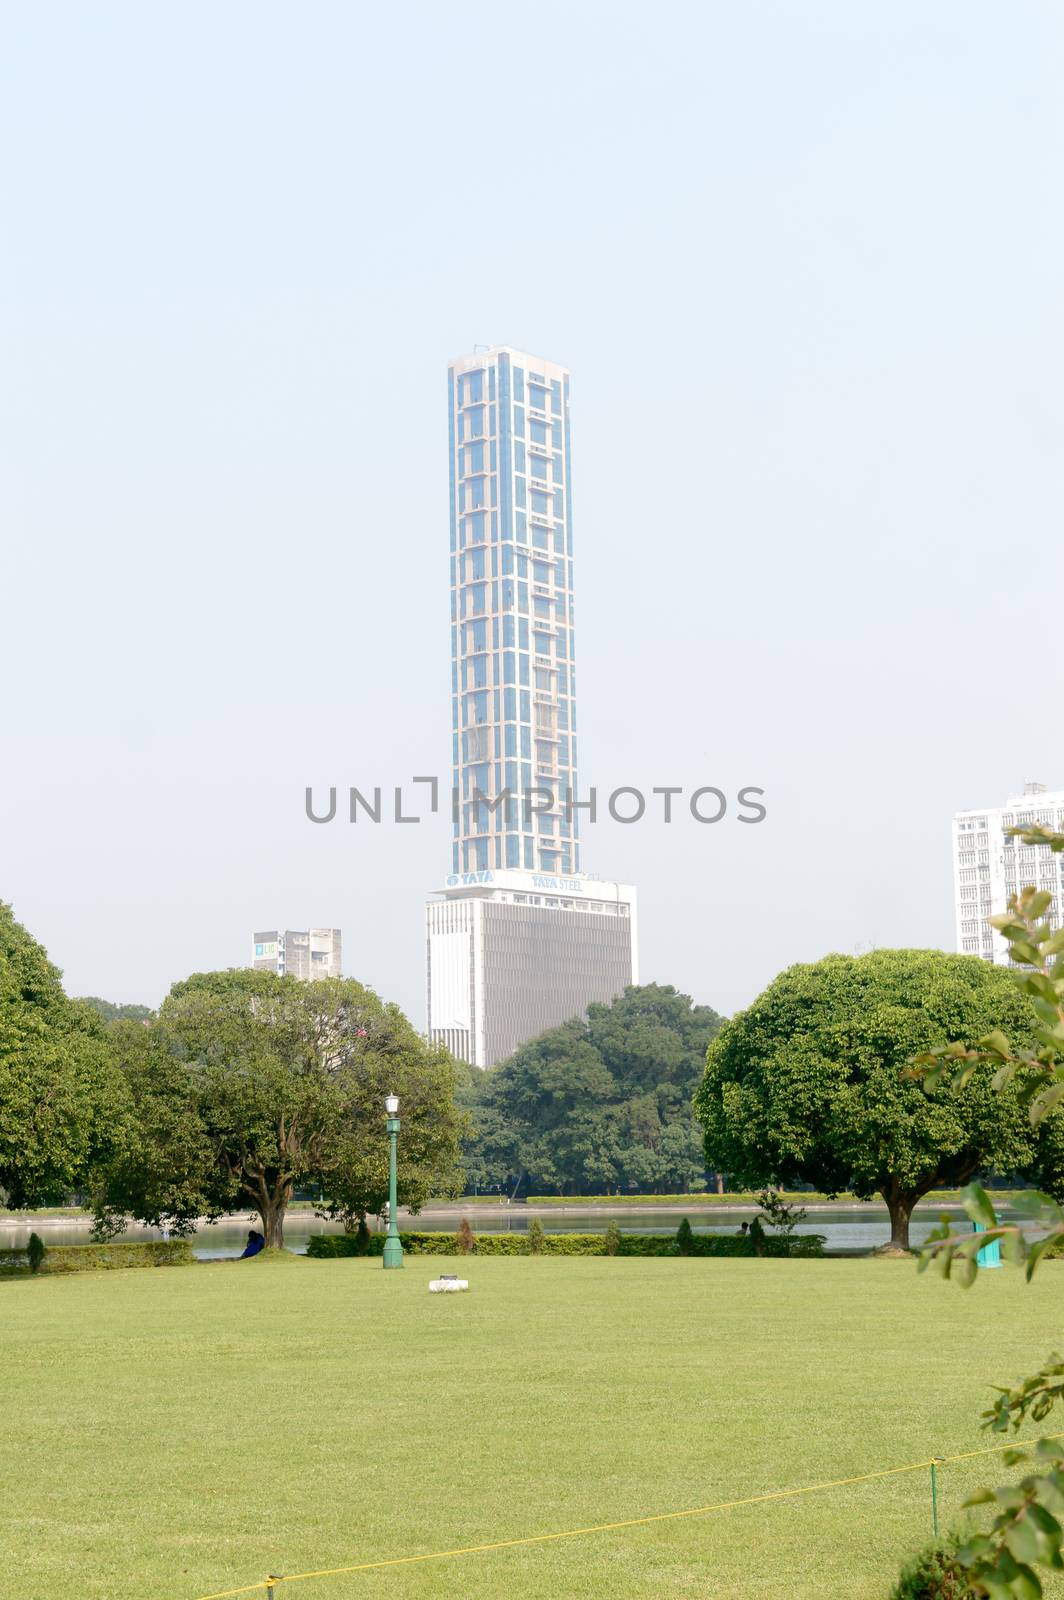 Tata Centre high-rise, sleek designed and steel tower tallest commercial buildings and important landmark located in central business district in city of joy, Kolkata, West Bengal, India Asia May 2019 by sudiptabhowmick